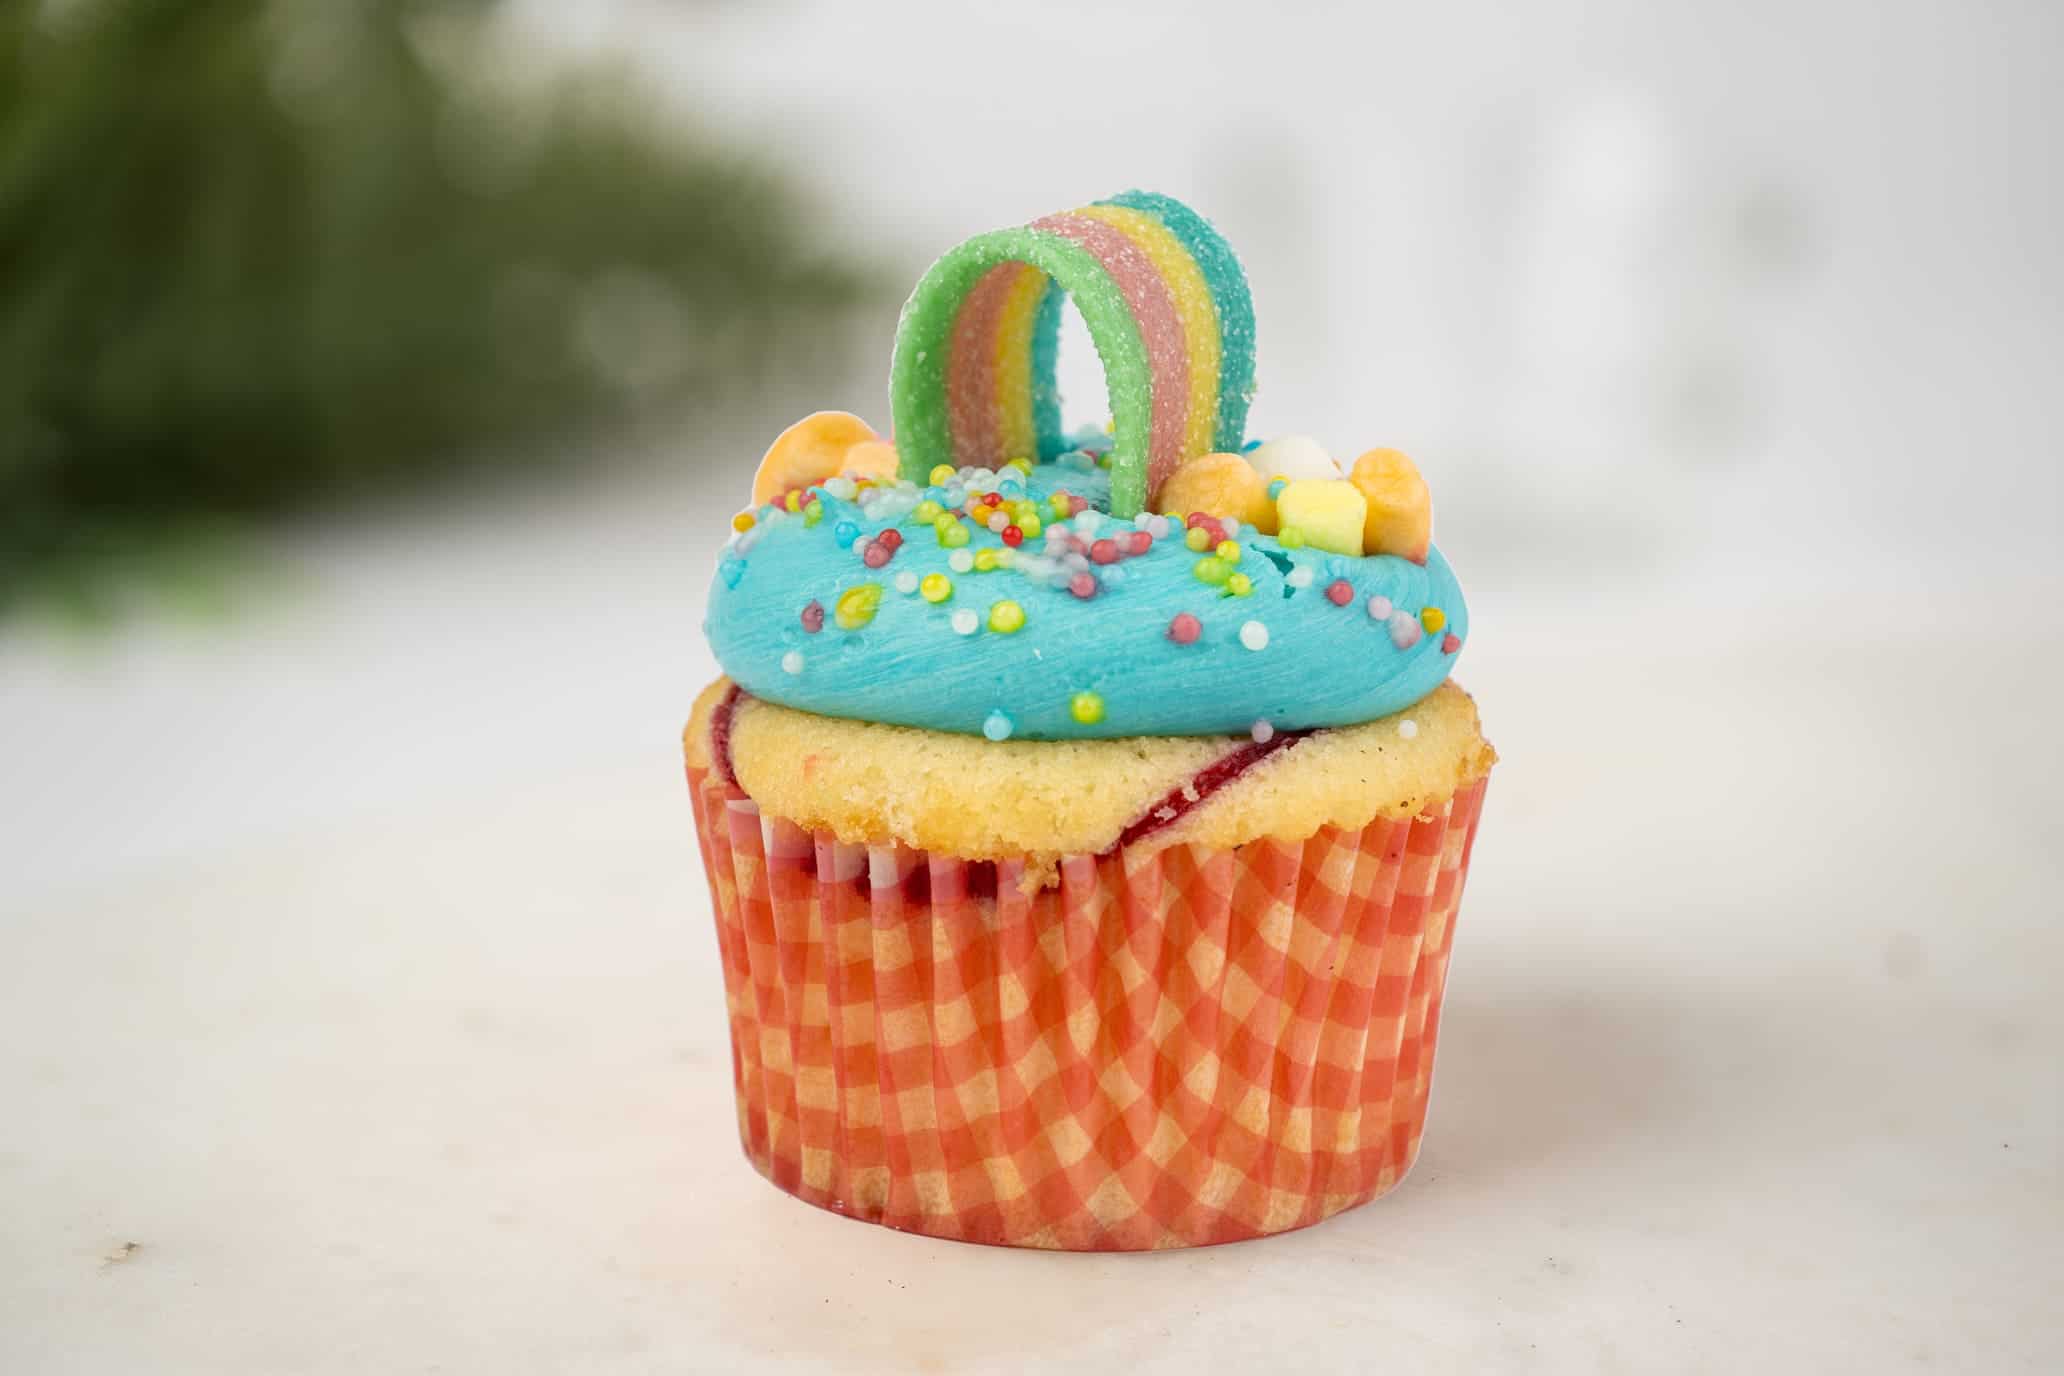 Order Cupcakes in Singapore: Cute Cupcakes with Love for Kids 🧁